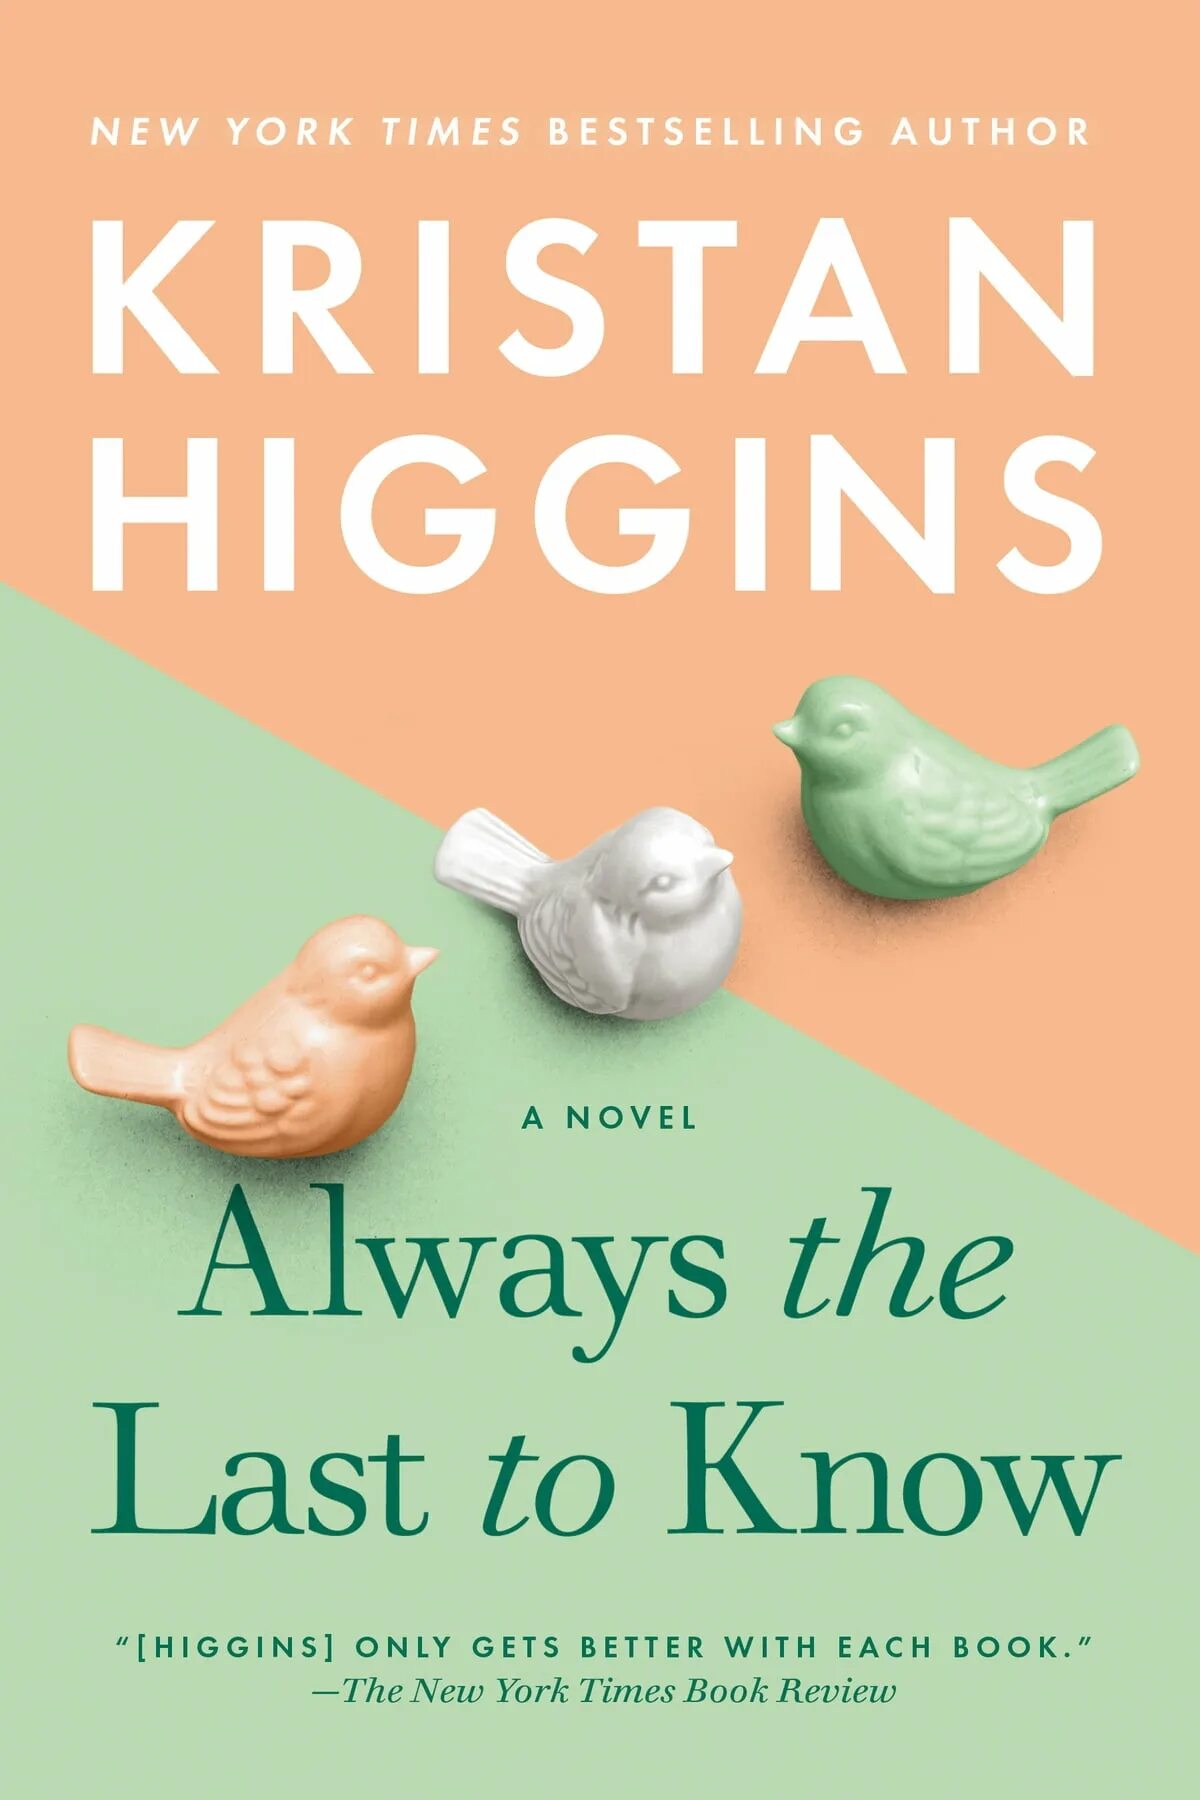 Always the last to know book by Kristan Higgins. Kristan Higgins книги на русском. She knows this book